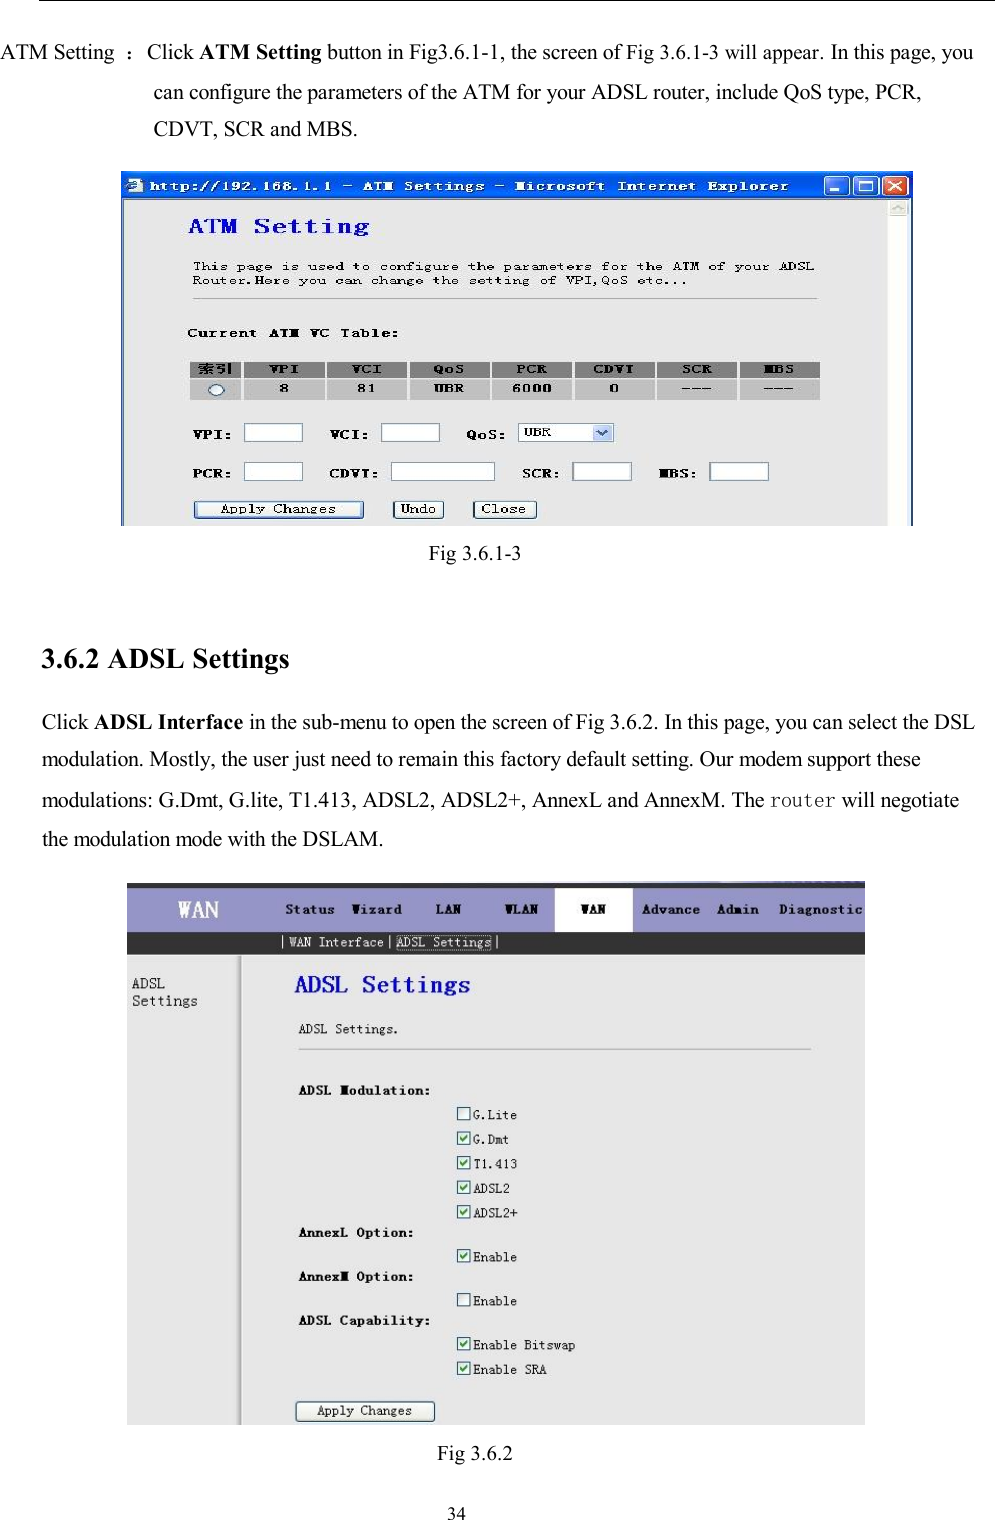                                                                     34 ATM Setting  ：Click ATM Setting button in Fig3.6.1-1, the screen of Fig 3.6.1-3 will appear. In this page, you can configure the parameters of the ATM for your ADSL router, include QoS type, PCR, CDVT, SCR and MBS.  Fig 3.6.1-3  3.6.2 ADSL Settings Click ADSL Interface in the sub-menu to open the screen of Fig 3.6.2. In this page, you can select the DSL modulation. Mostly, the user just need to remain this factory default setting. Our modem support these modulations: G.Dmt, G.lite, T1.413, ADSL2, ADSL2+, AnnexL and AnnexM. The router will negotiate the modulation mode with the DSLAM.  Fig 3.6.2 